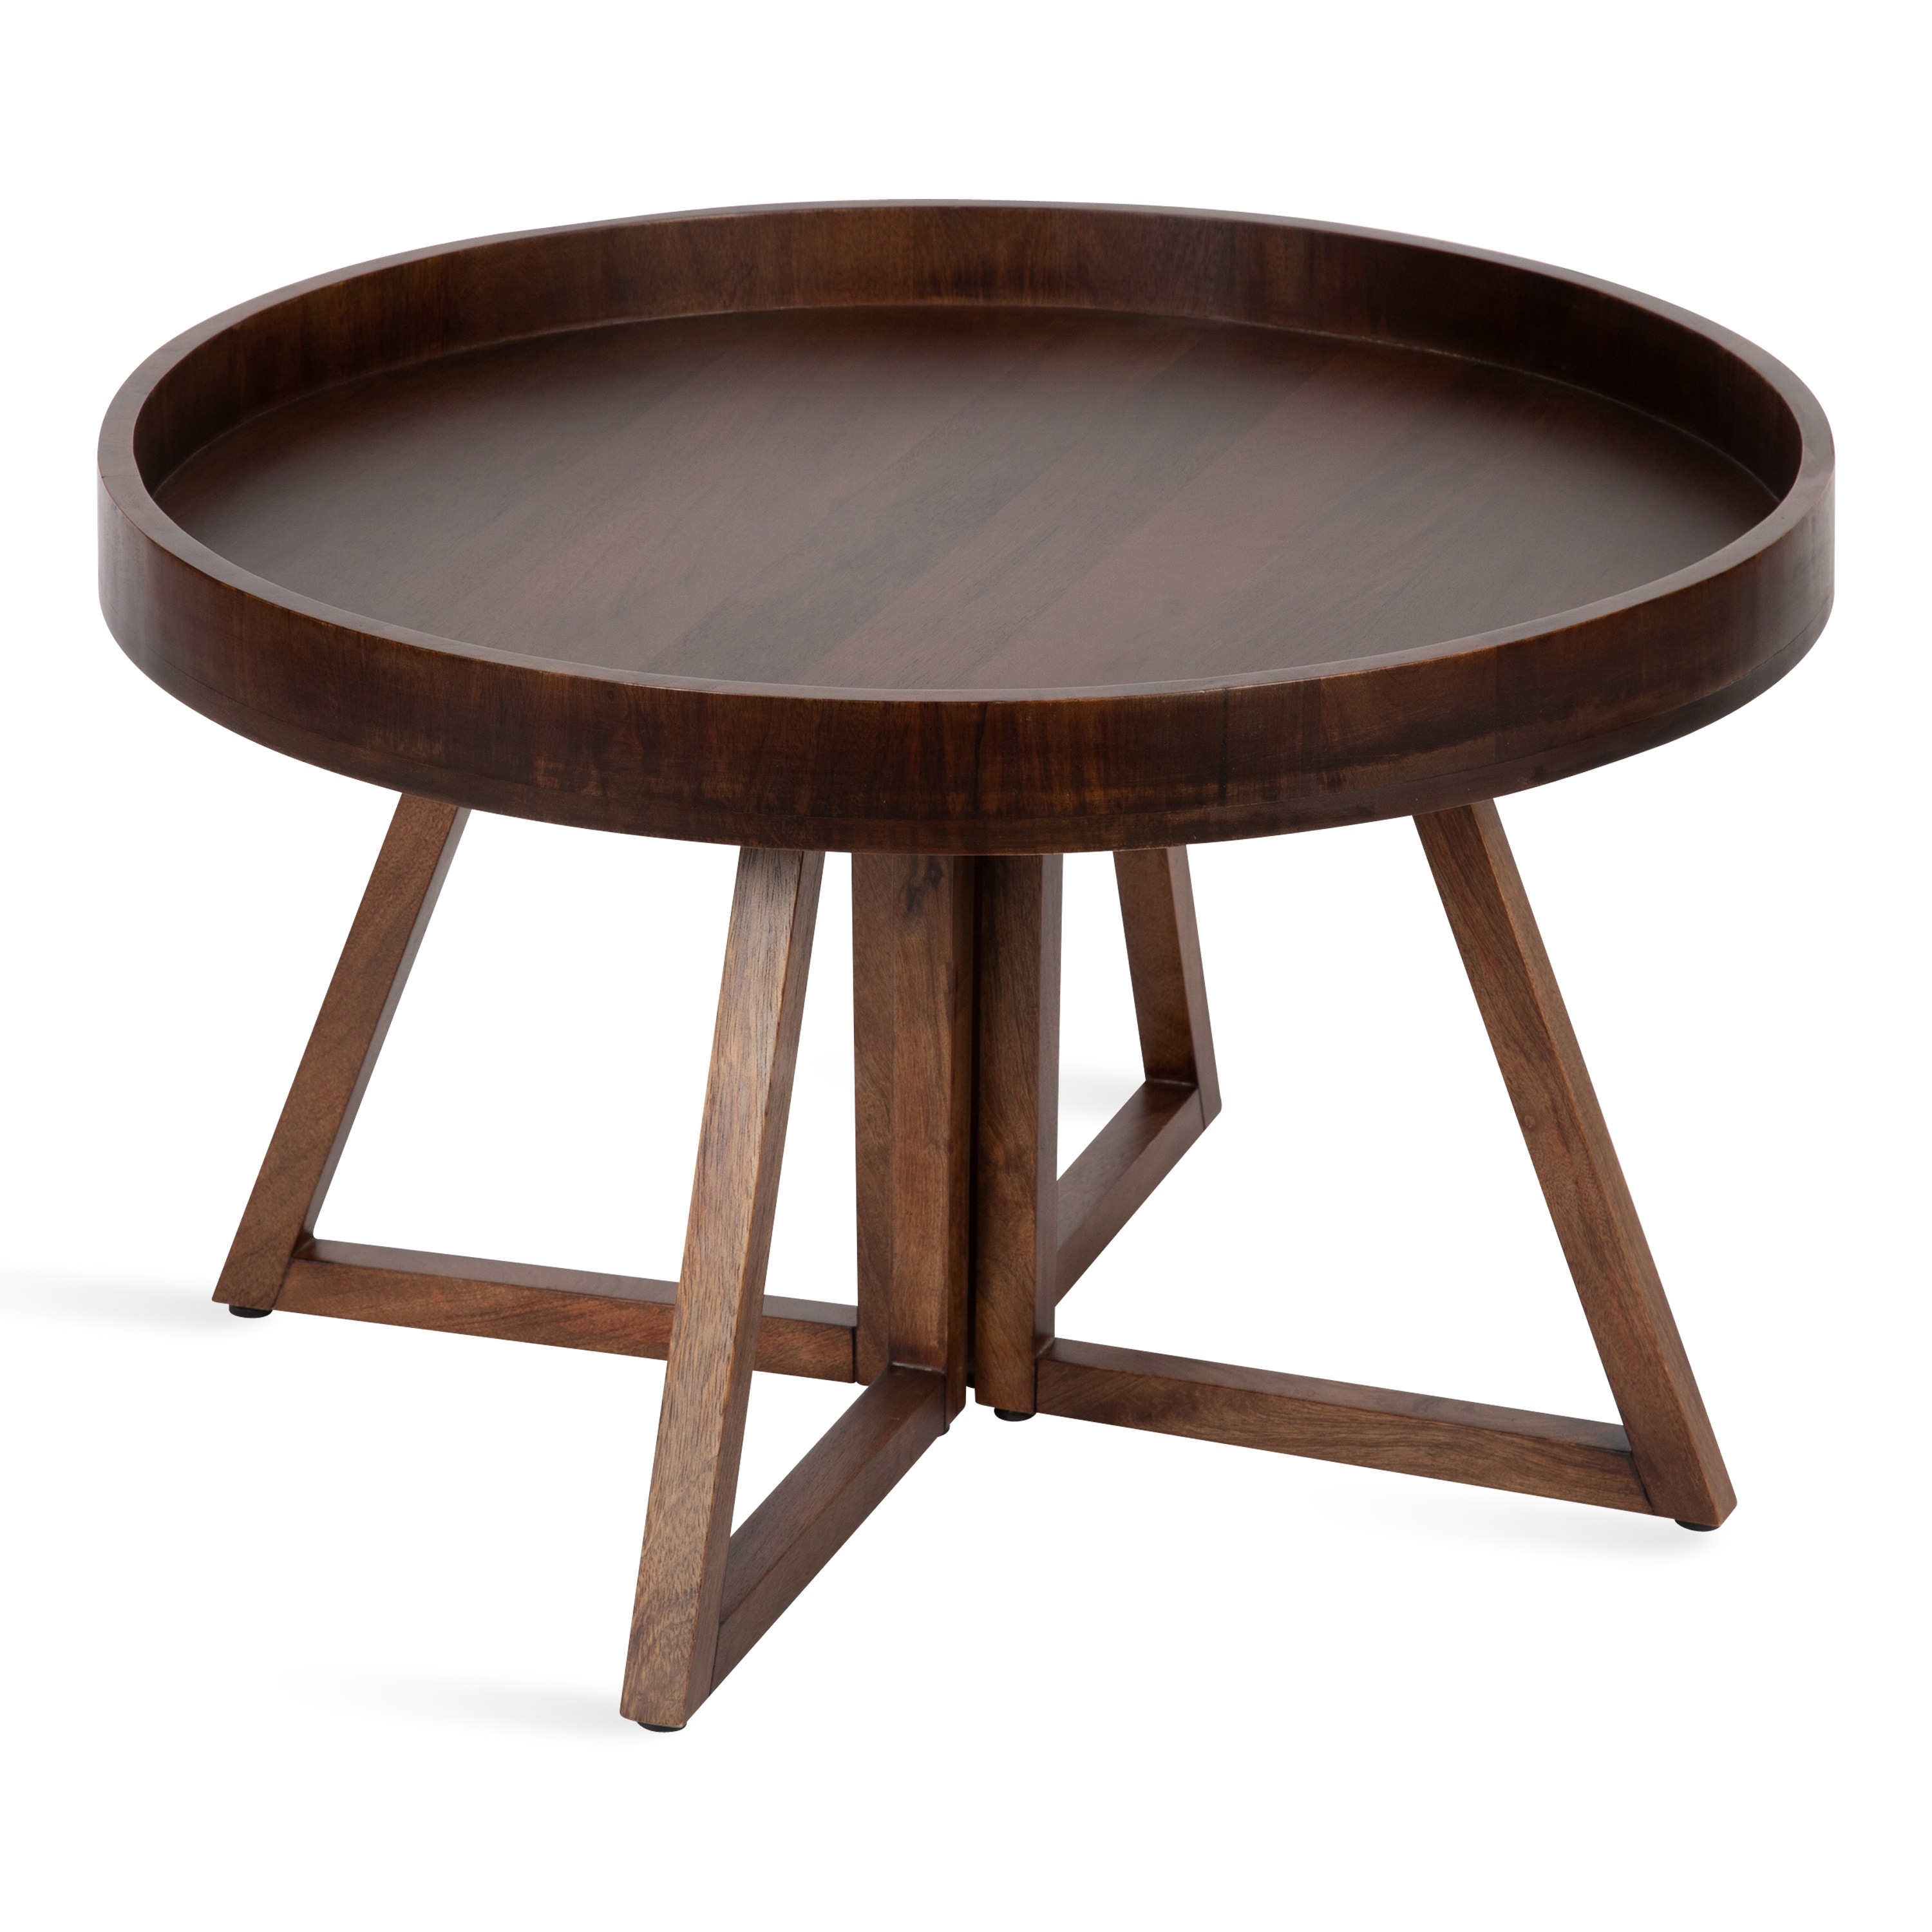 Kate And Laurel Avery 30 Inch Round Coffee Table 30 Diameter Overstock 20105500 Walnut Brown